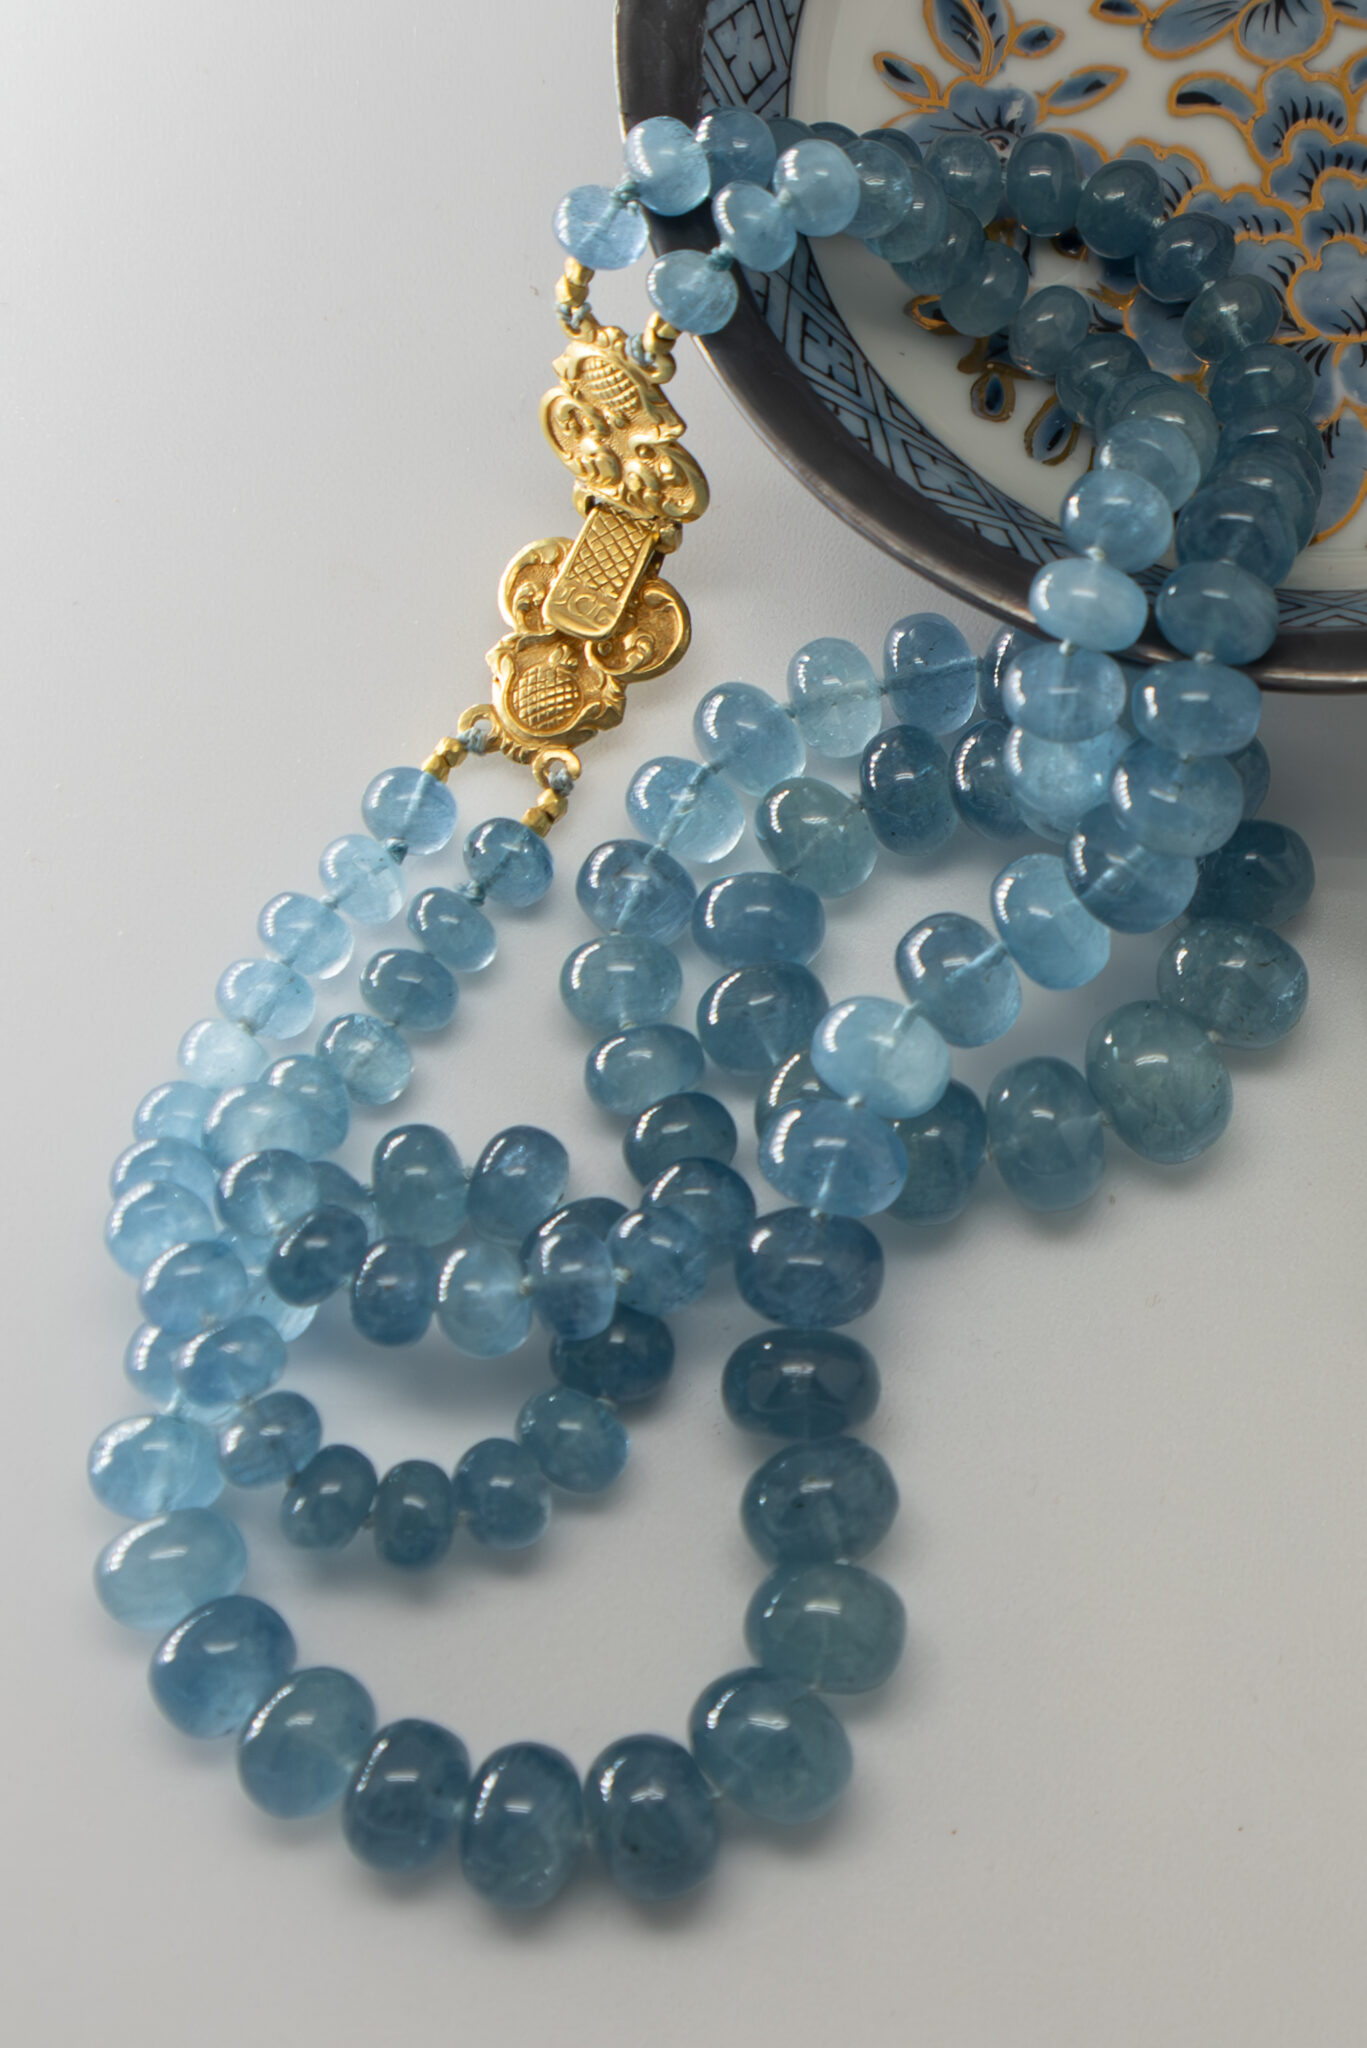 Double strand moss aquamarine bead necklace with Cape Town Gold antique clasp